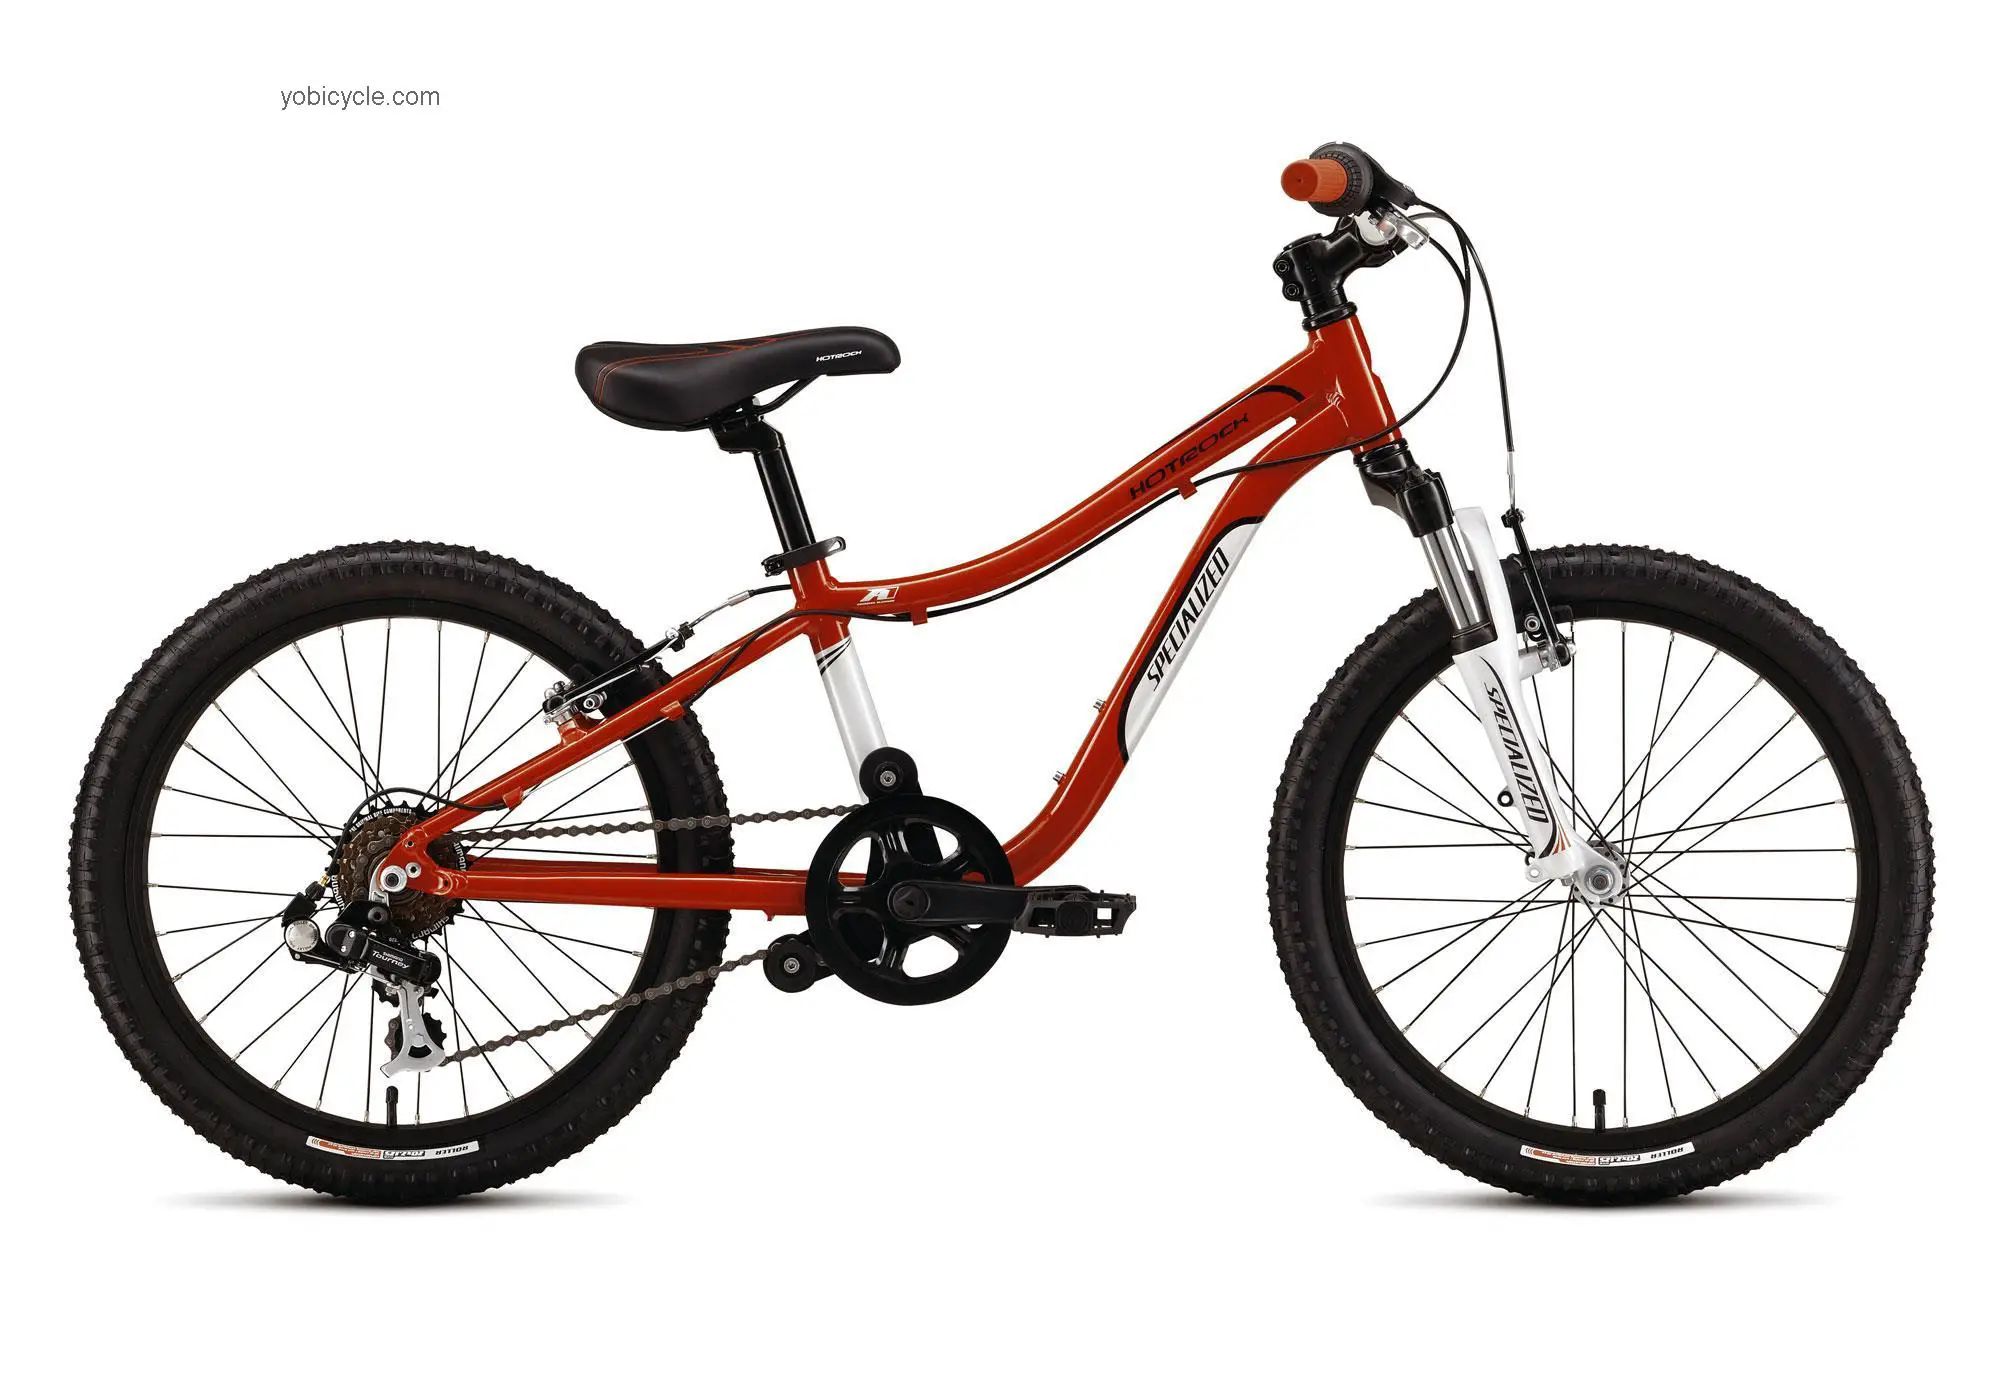 Specialized Hotrock 20 6-speed Boys 2012 comparison online with competitors